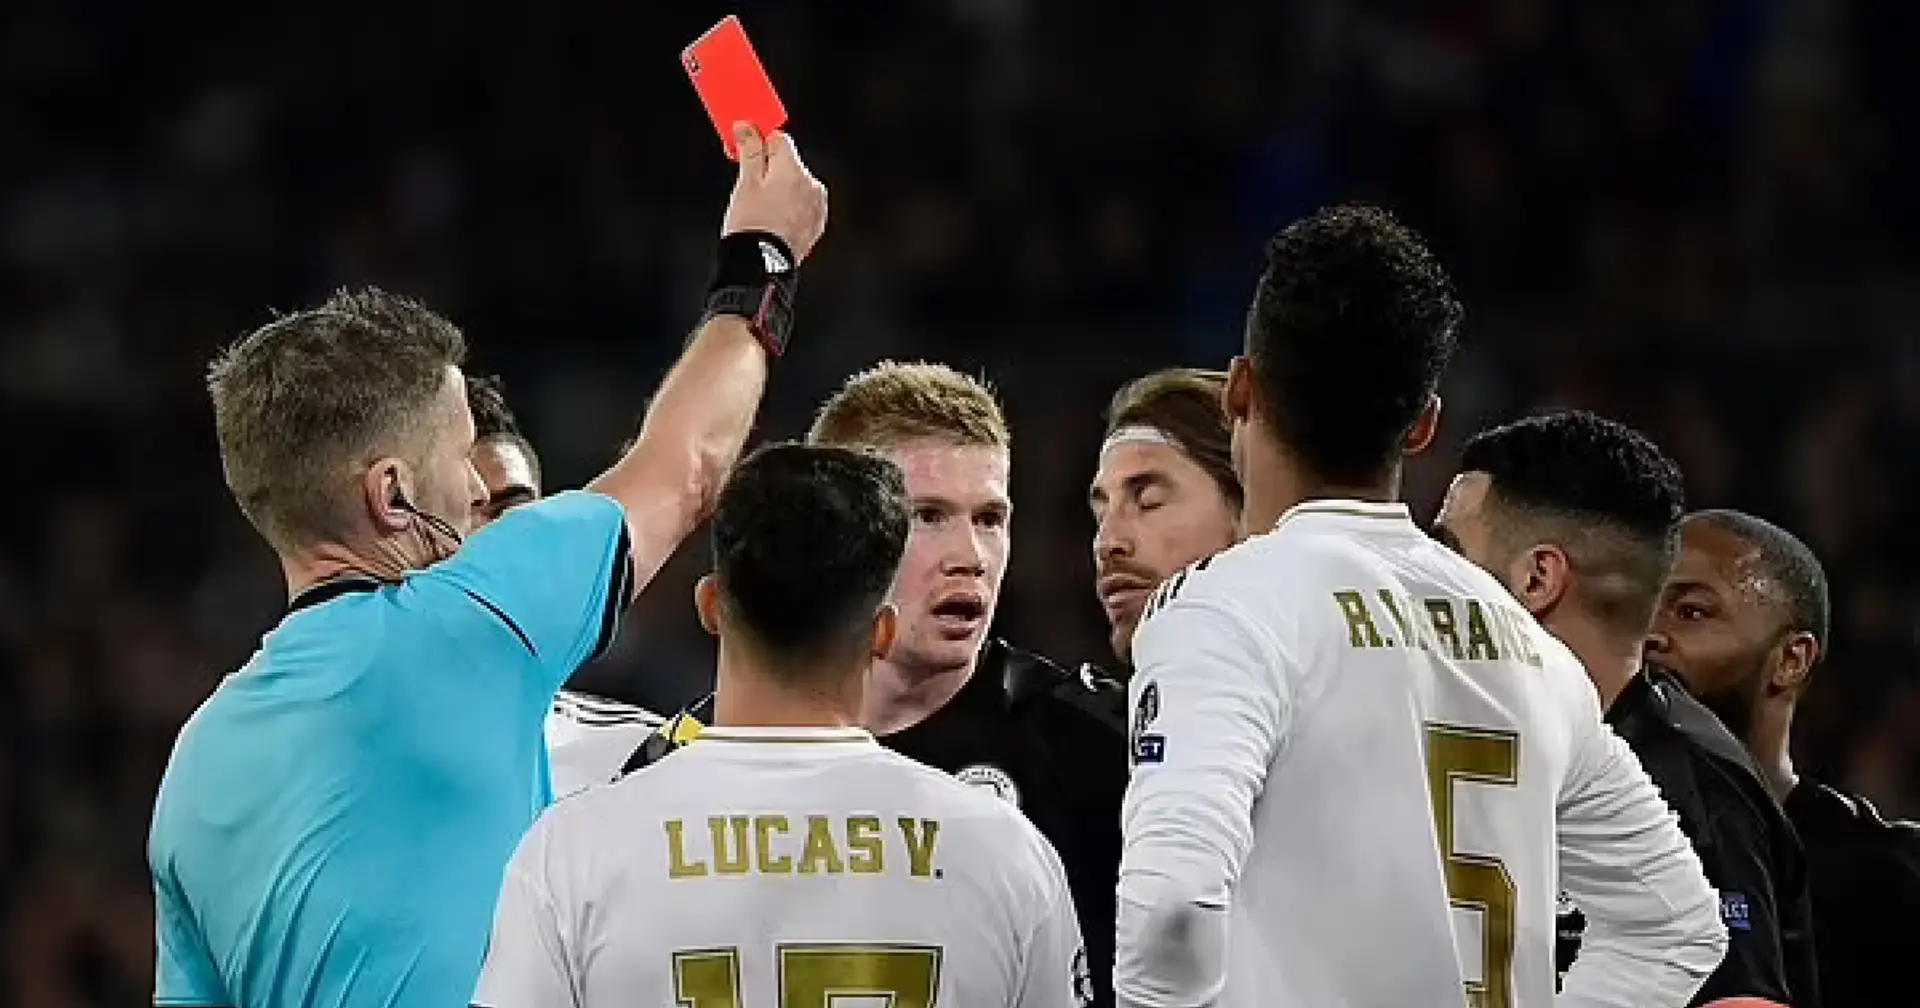 UEFA announce referee for Real Madrid v Man City – Madrid's record with him is woeful